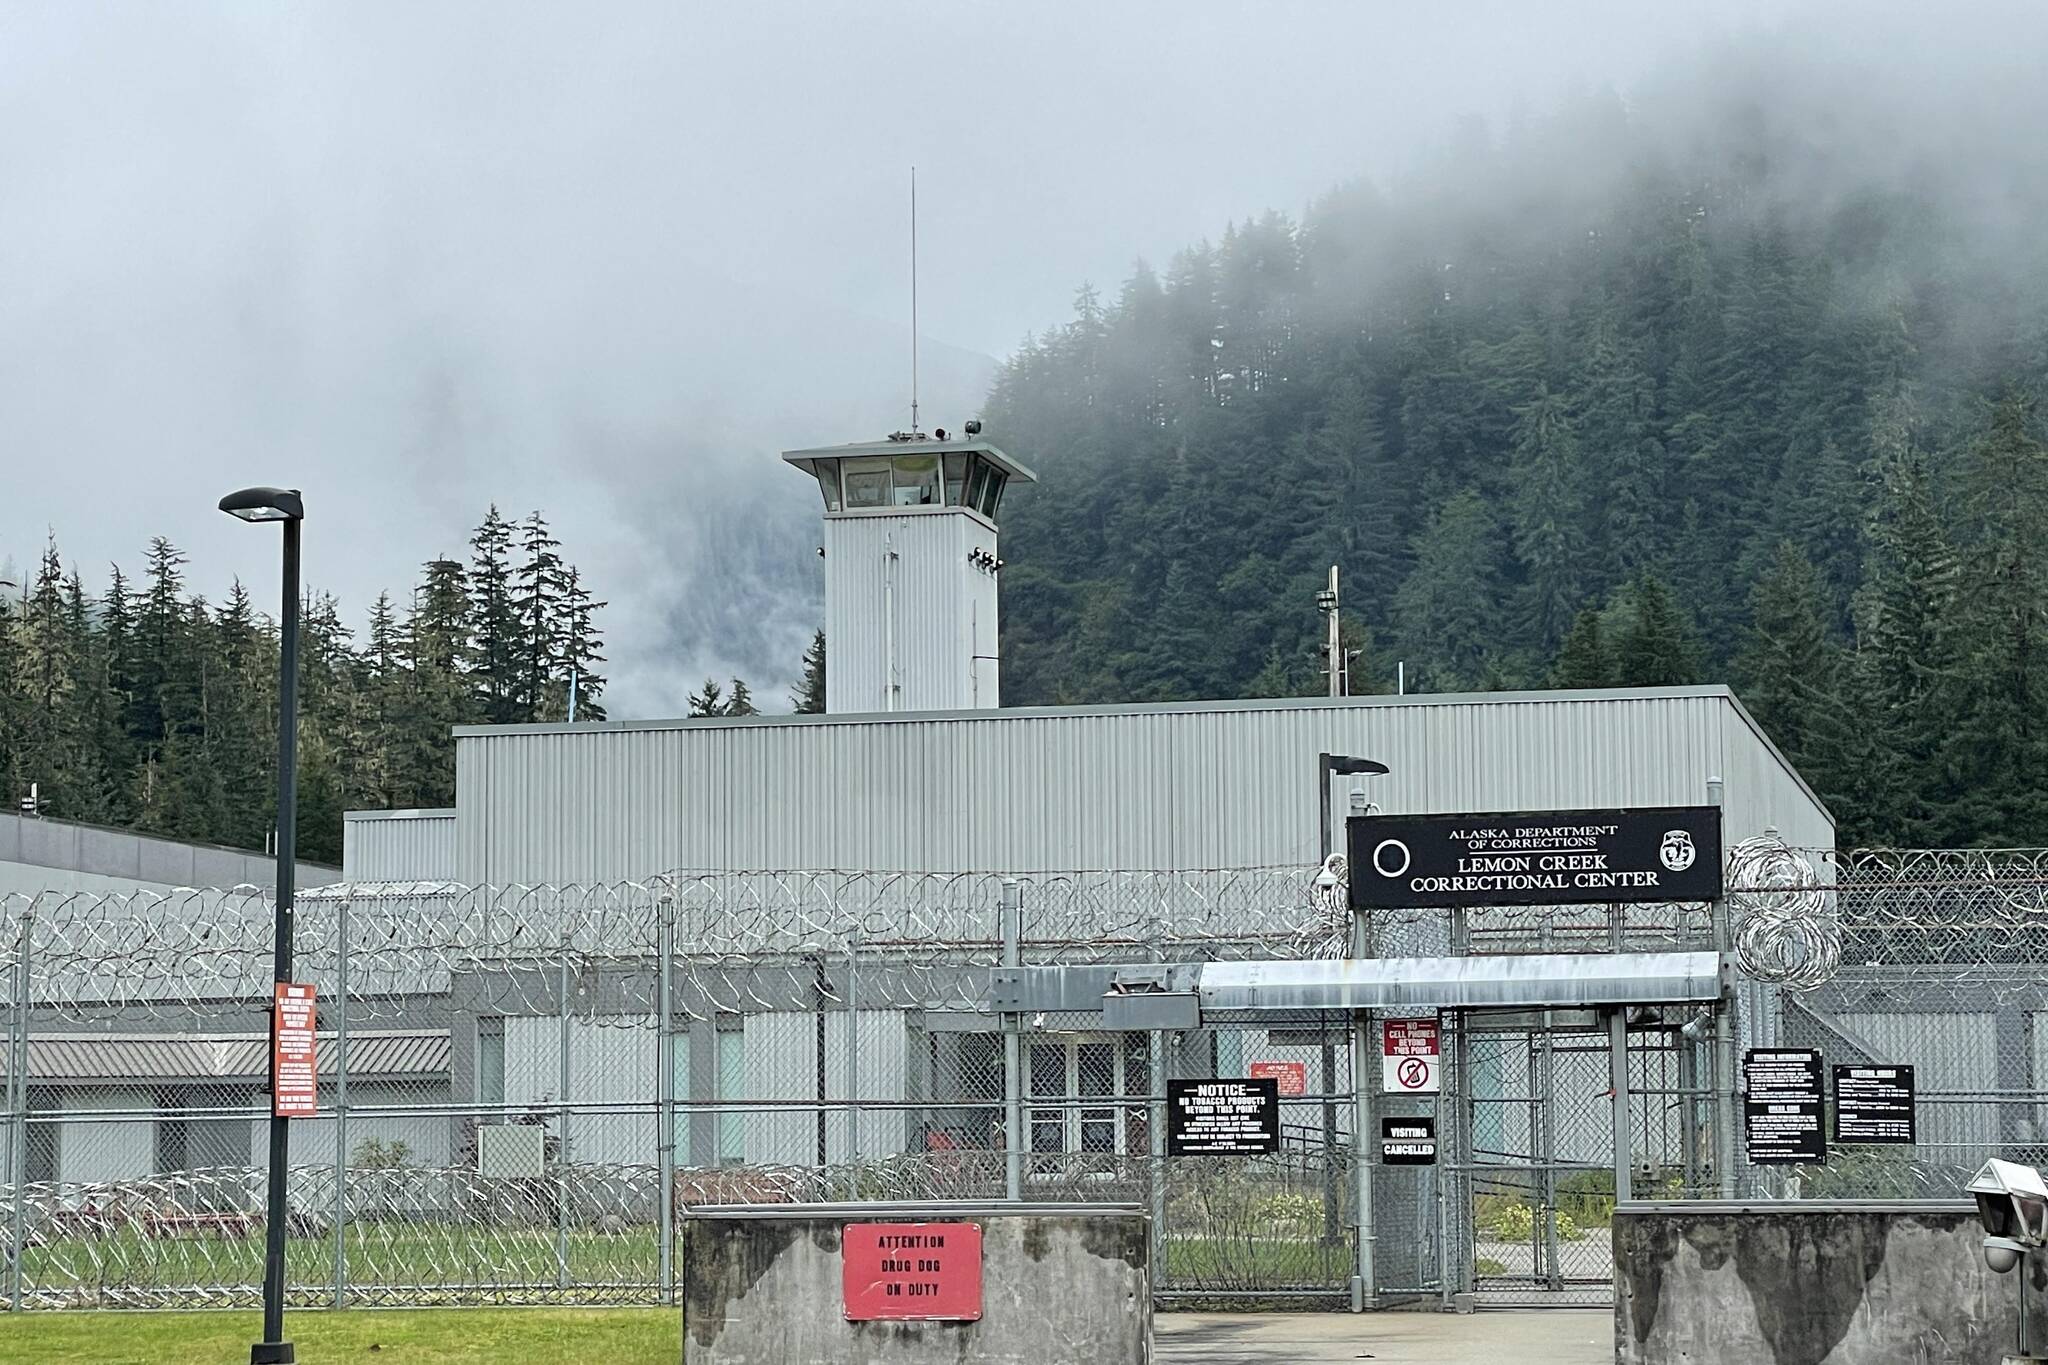 Lemon Creek Correctional Center in Juneau is the site of an outbreak of the coronavirus with at least 23 active case as of Sept. 16, said a Department of Corrections official. (Michael S. Lockett / Juneau Empire)